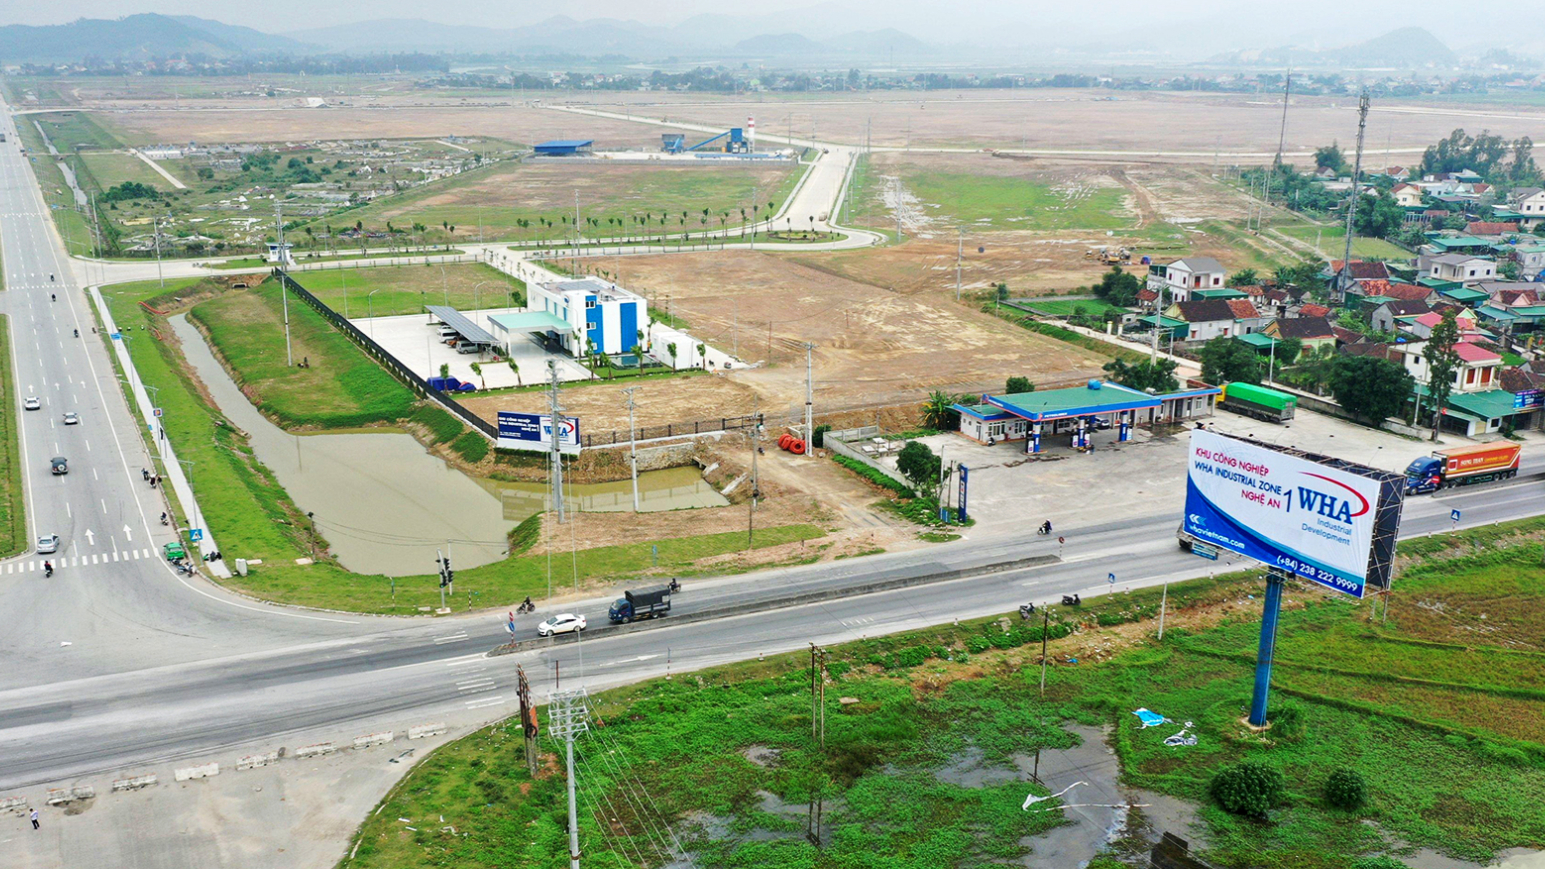 WHA Industrial Zone 1 in Nghe An province, central Vietnam. Photo courtesy of Nghe An newspaper.